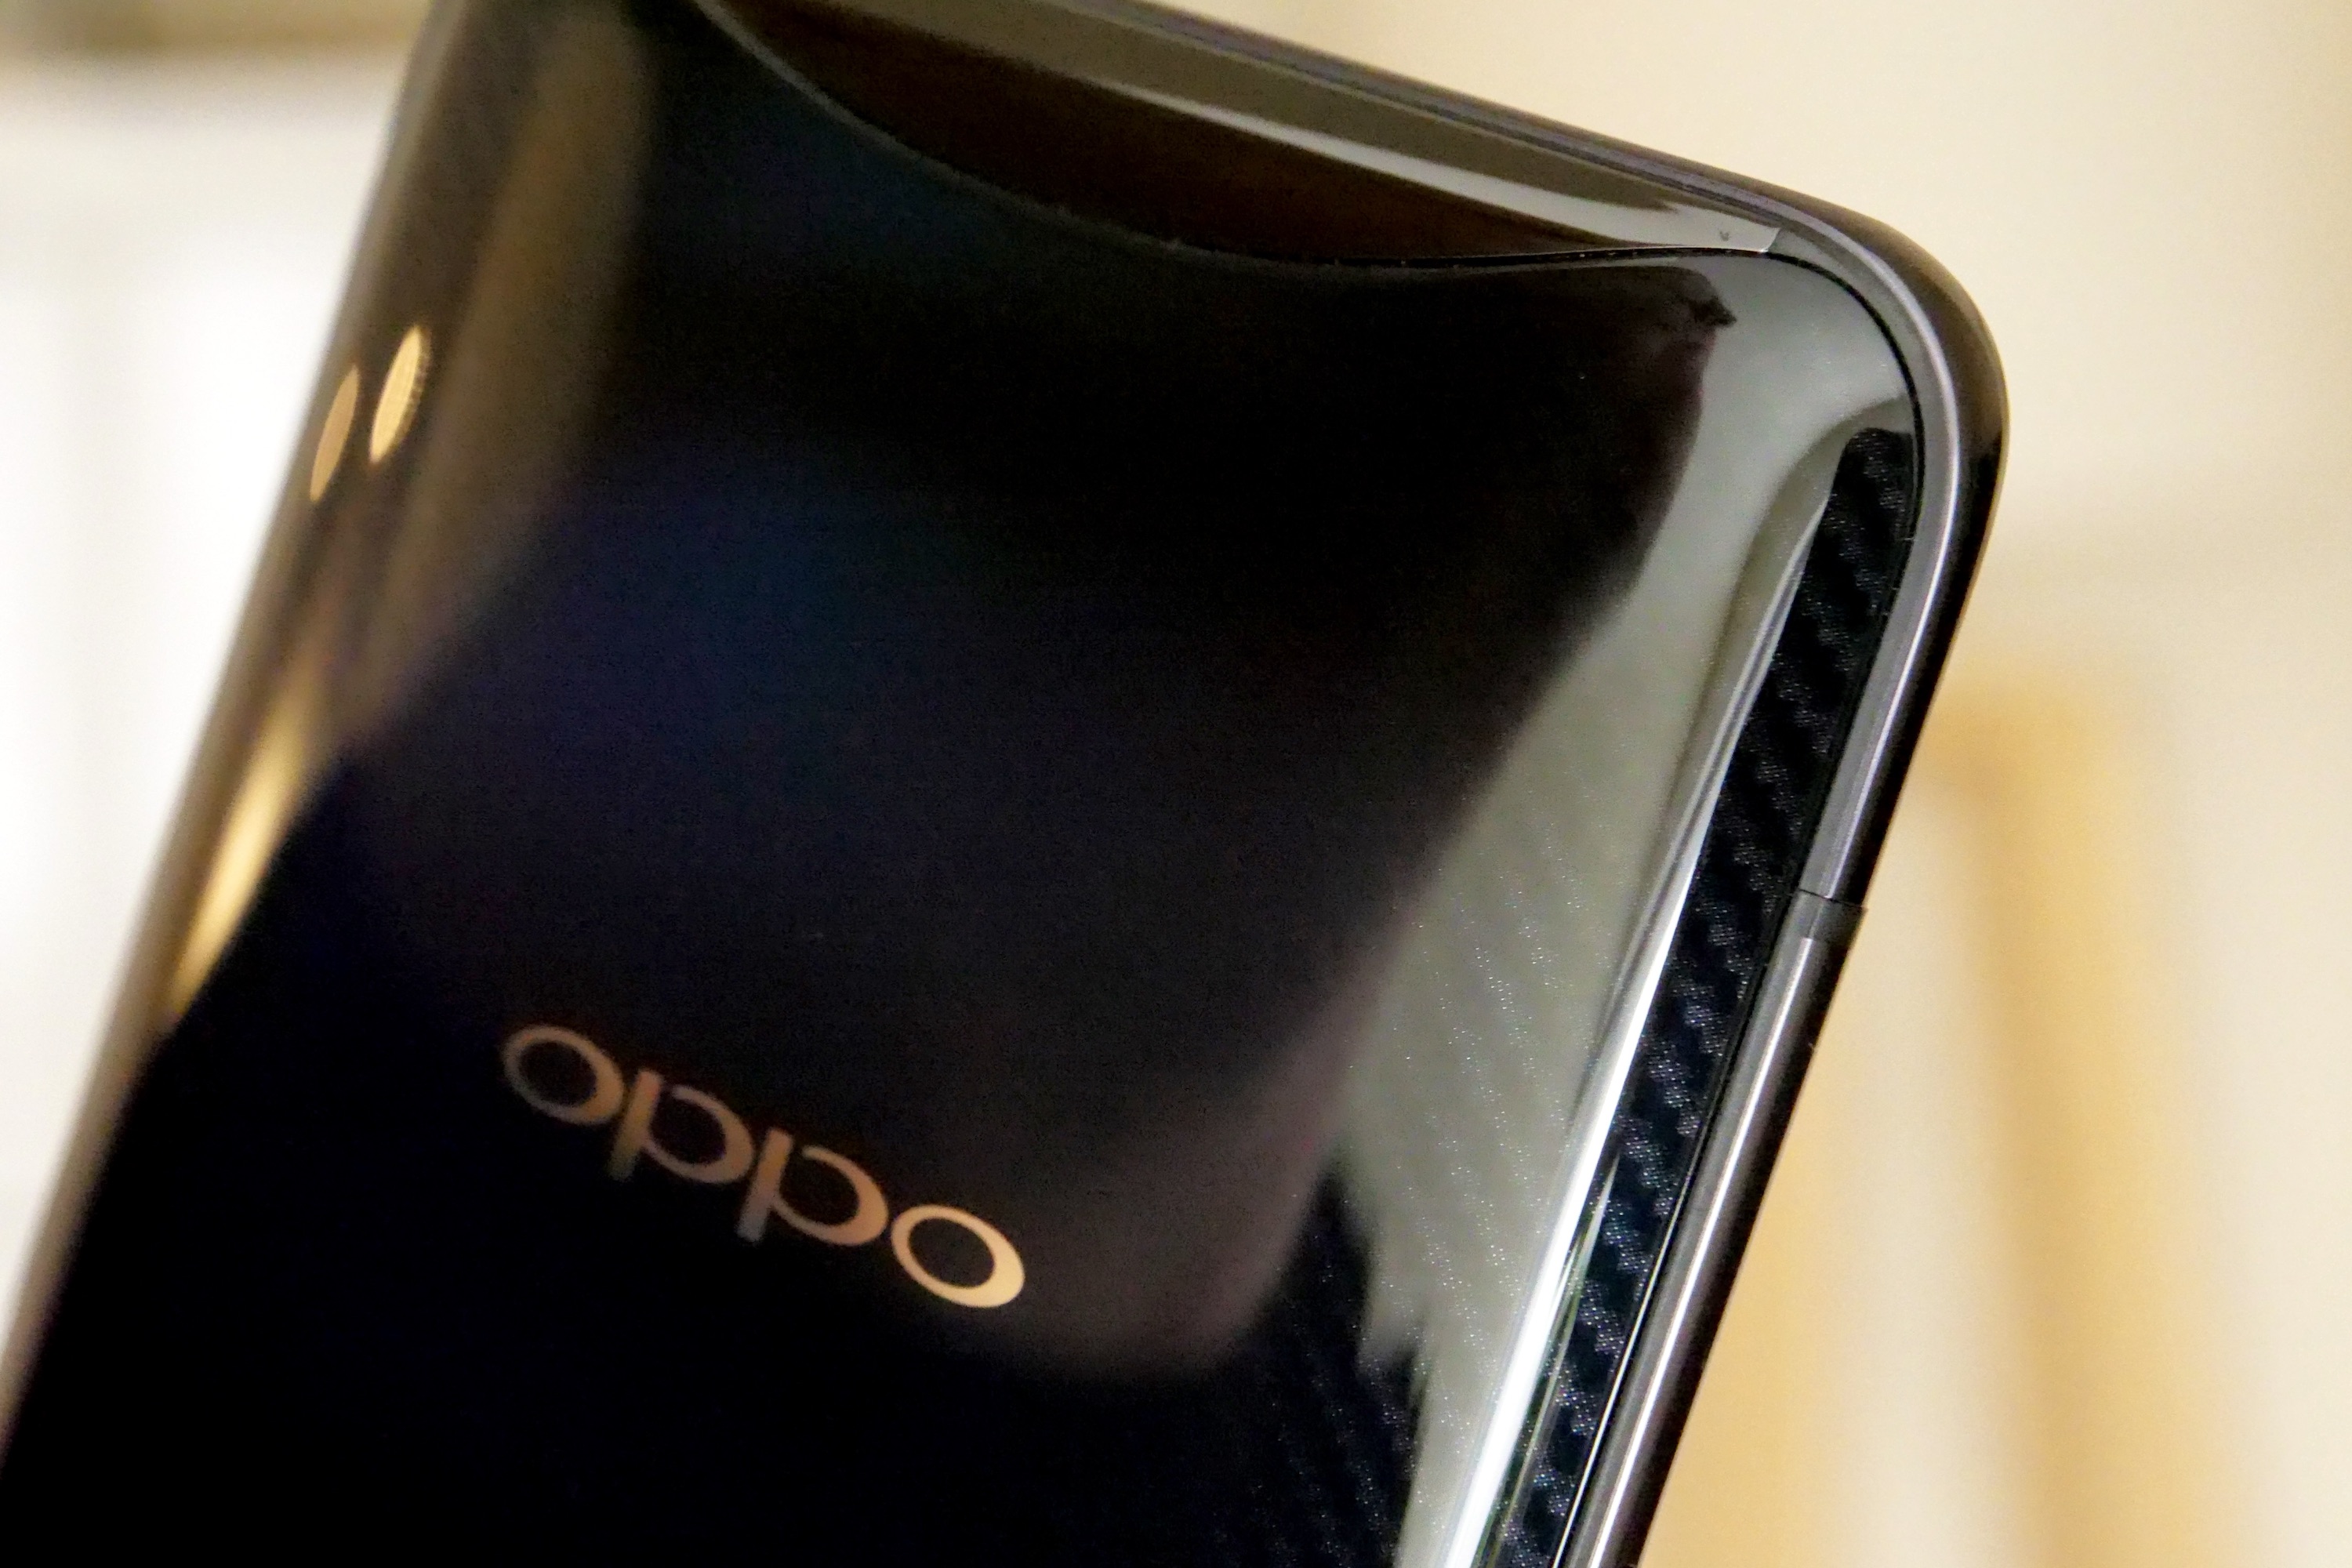 The carbon effect on the back of the Oppo Find X Lamborghini Edition.